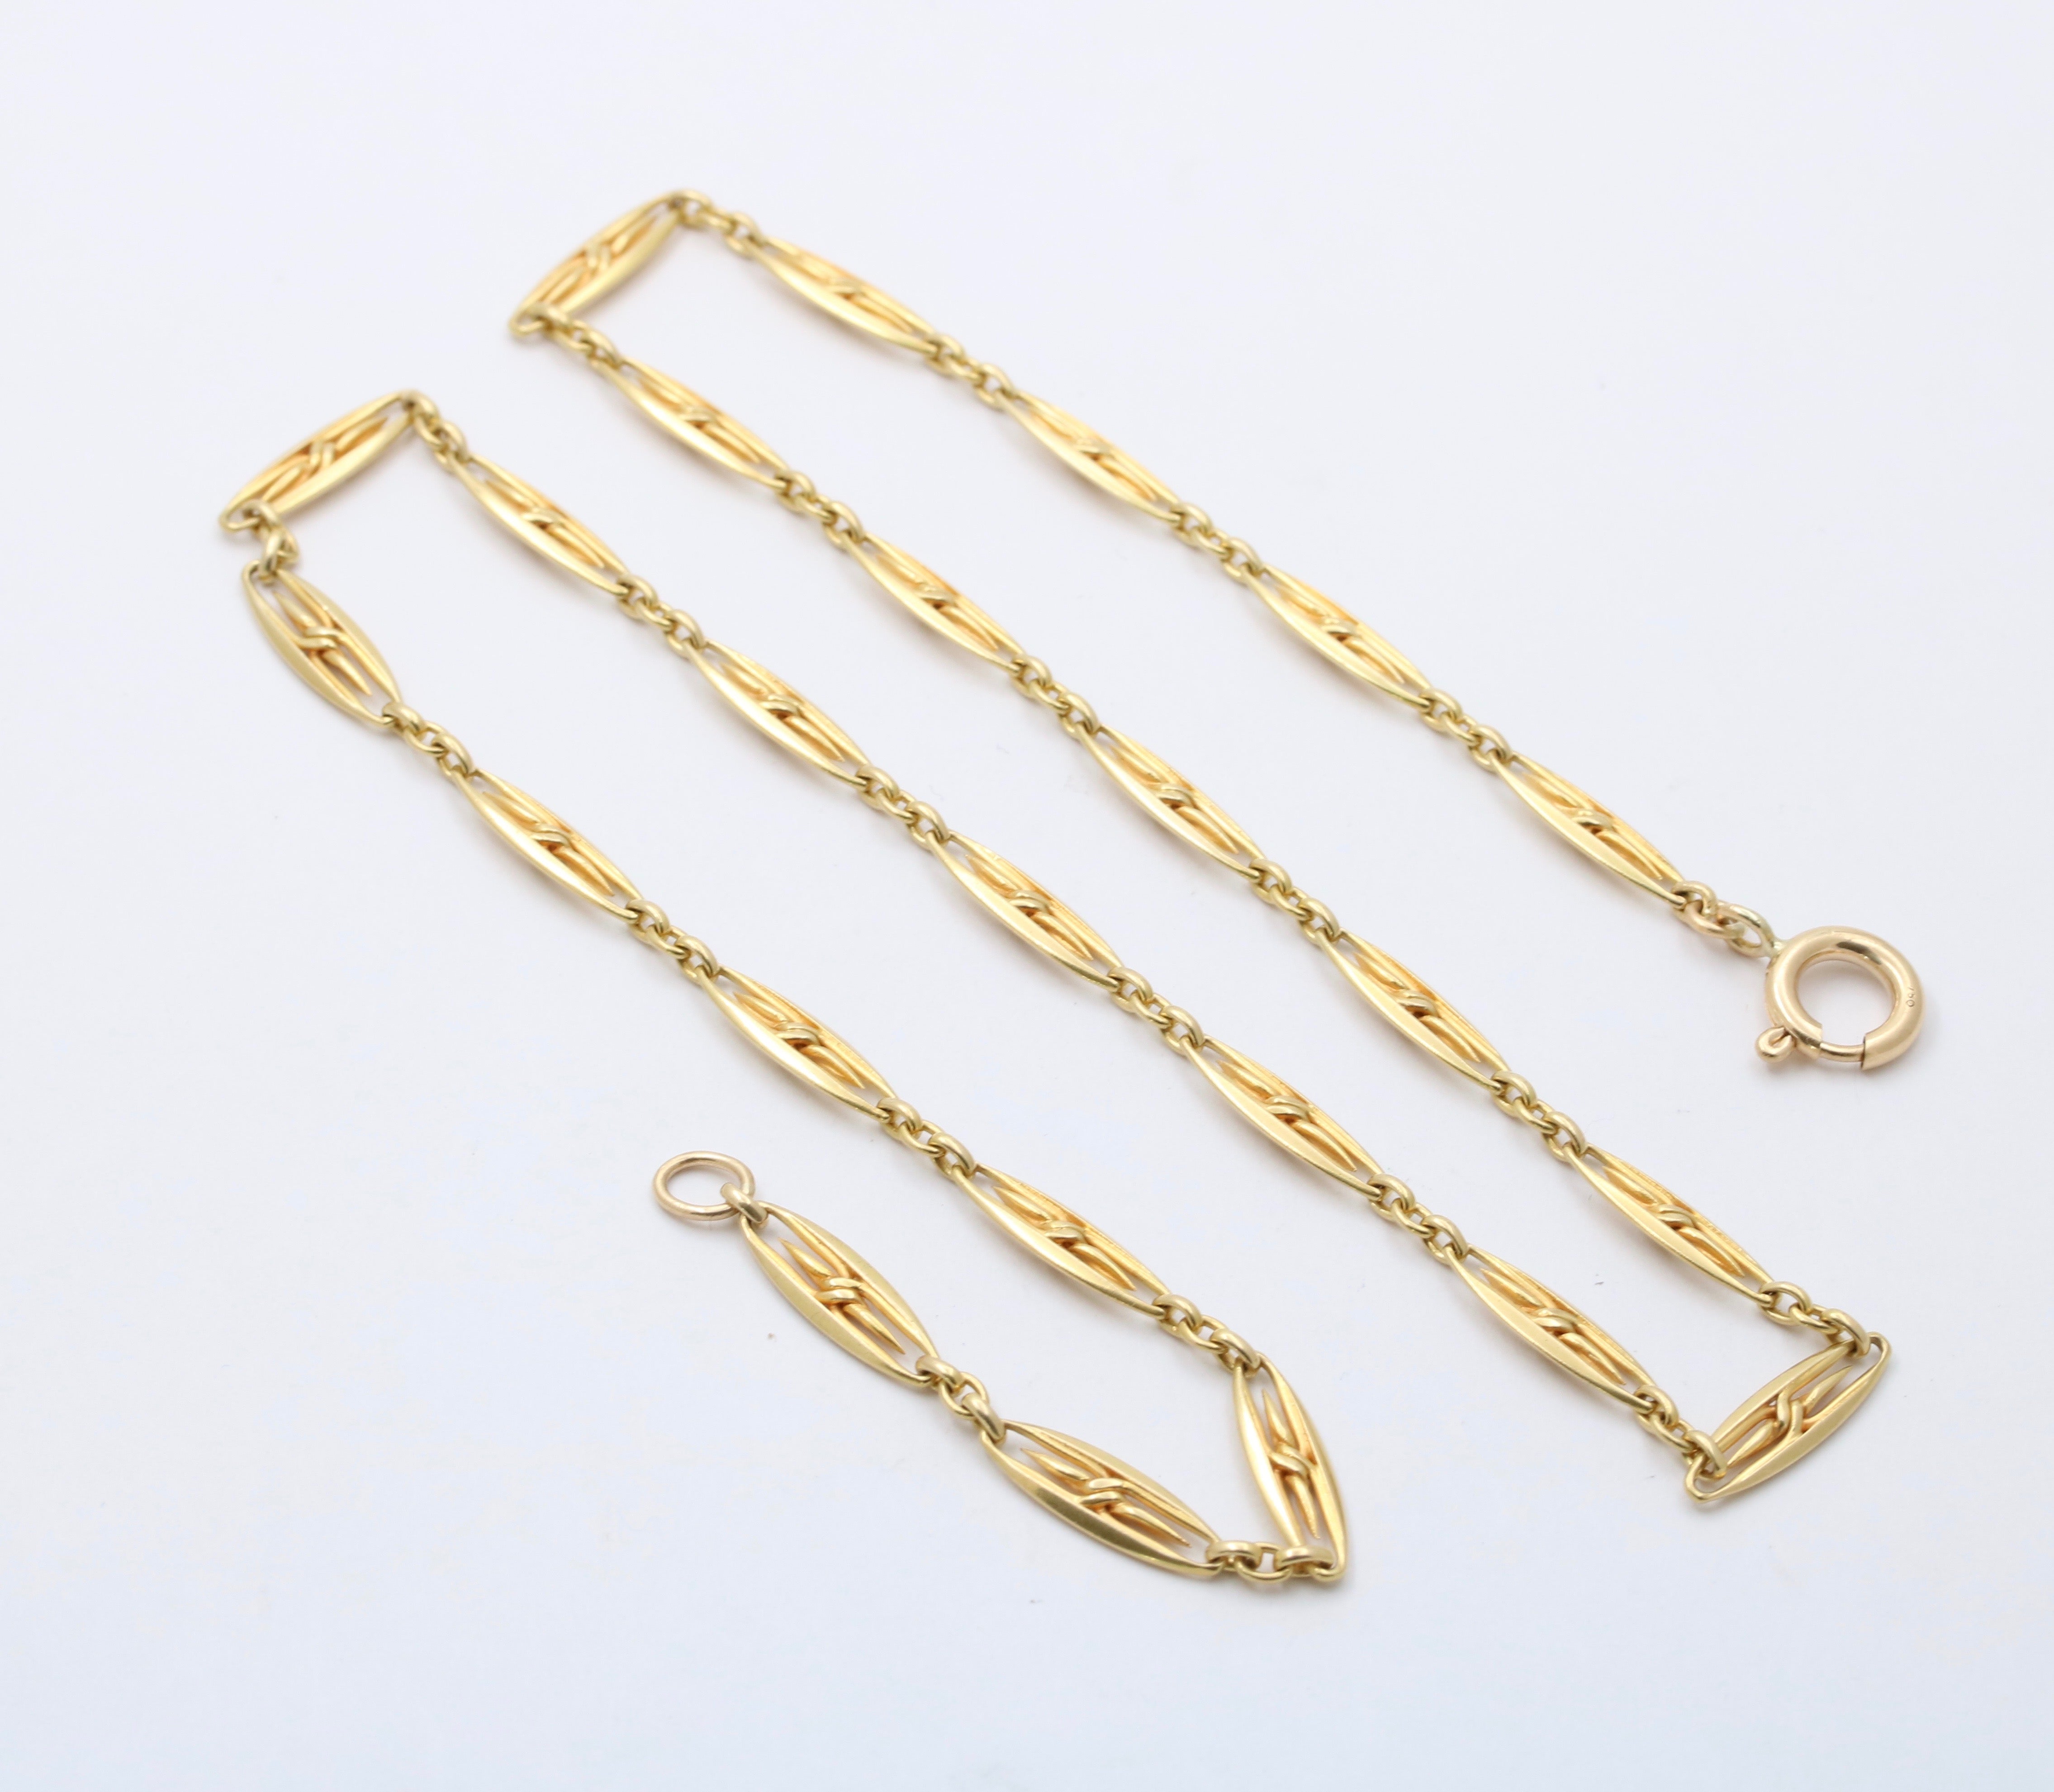 REFLECTION CHAIN NECKLACE (18K GOLD PLATED) – KIRSTIN ASH (United States)